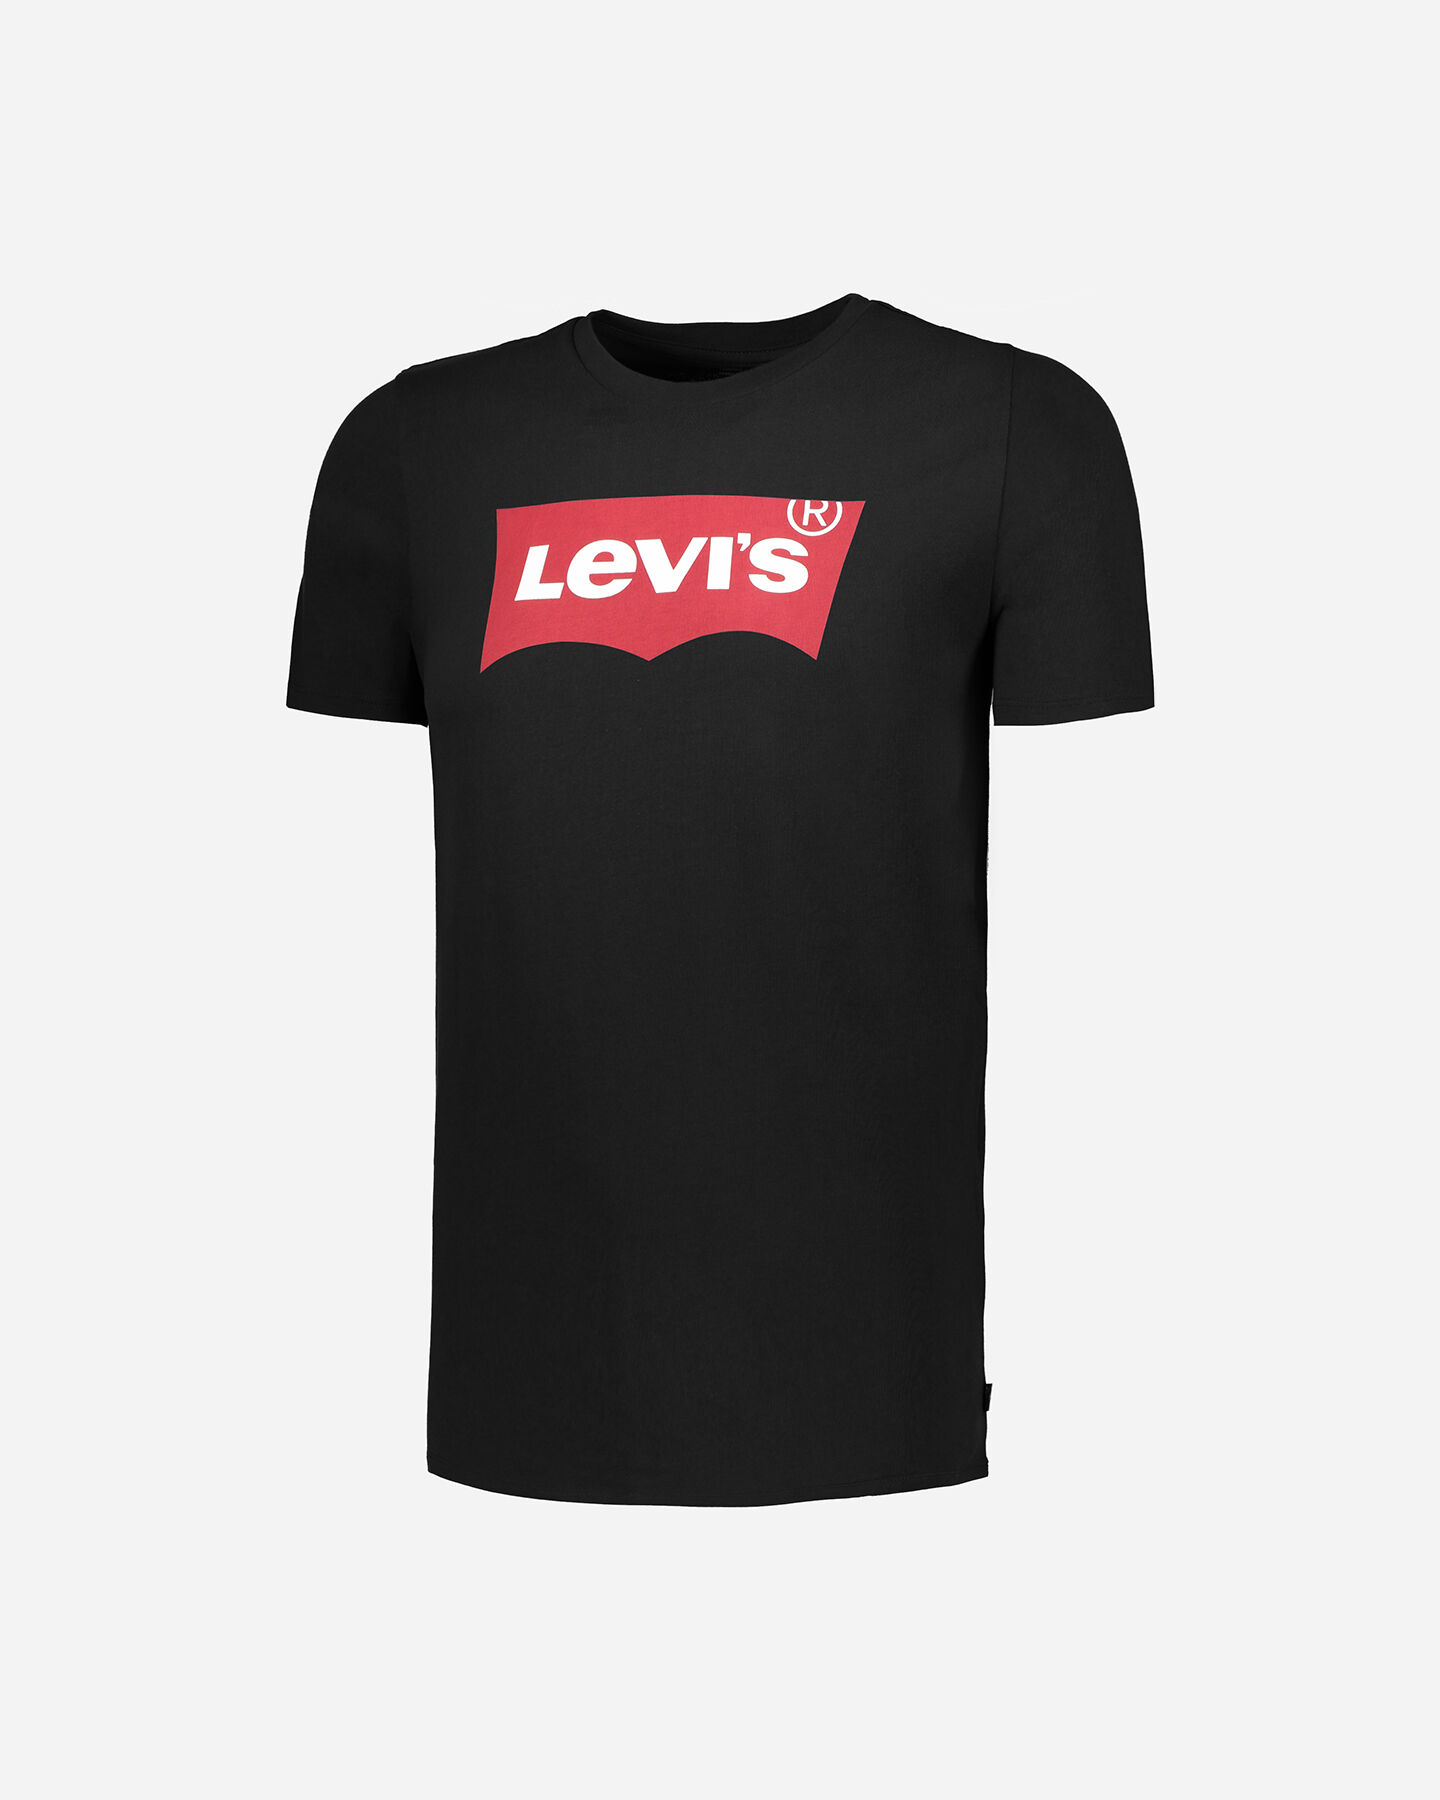  T-Shirt LEVI'S HOUSEMARK M S4063626|0137|XS scatto 5